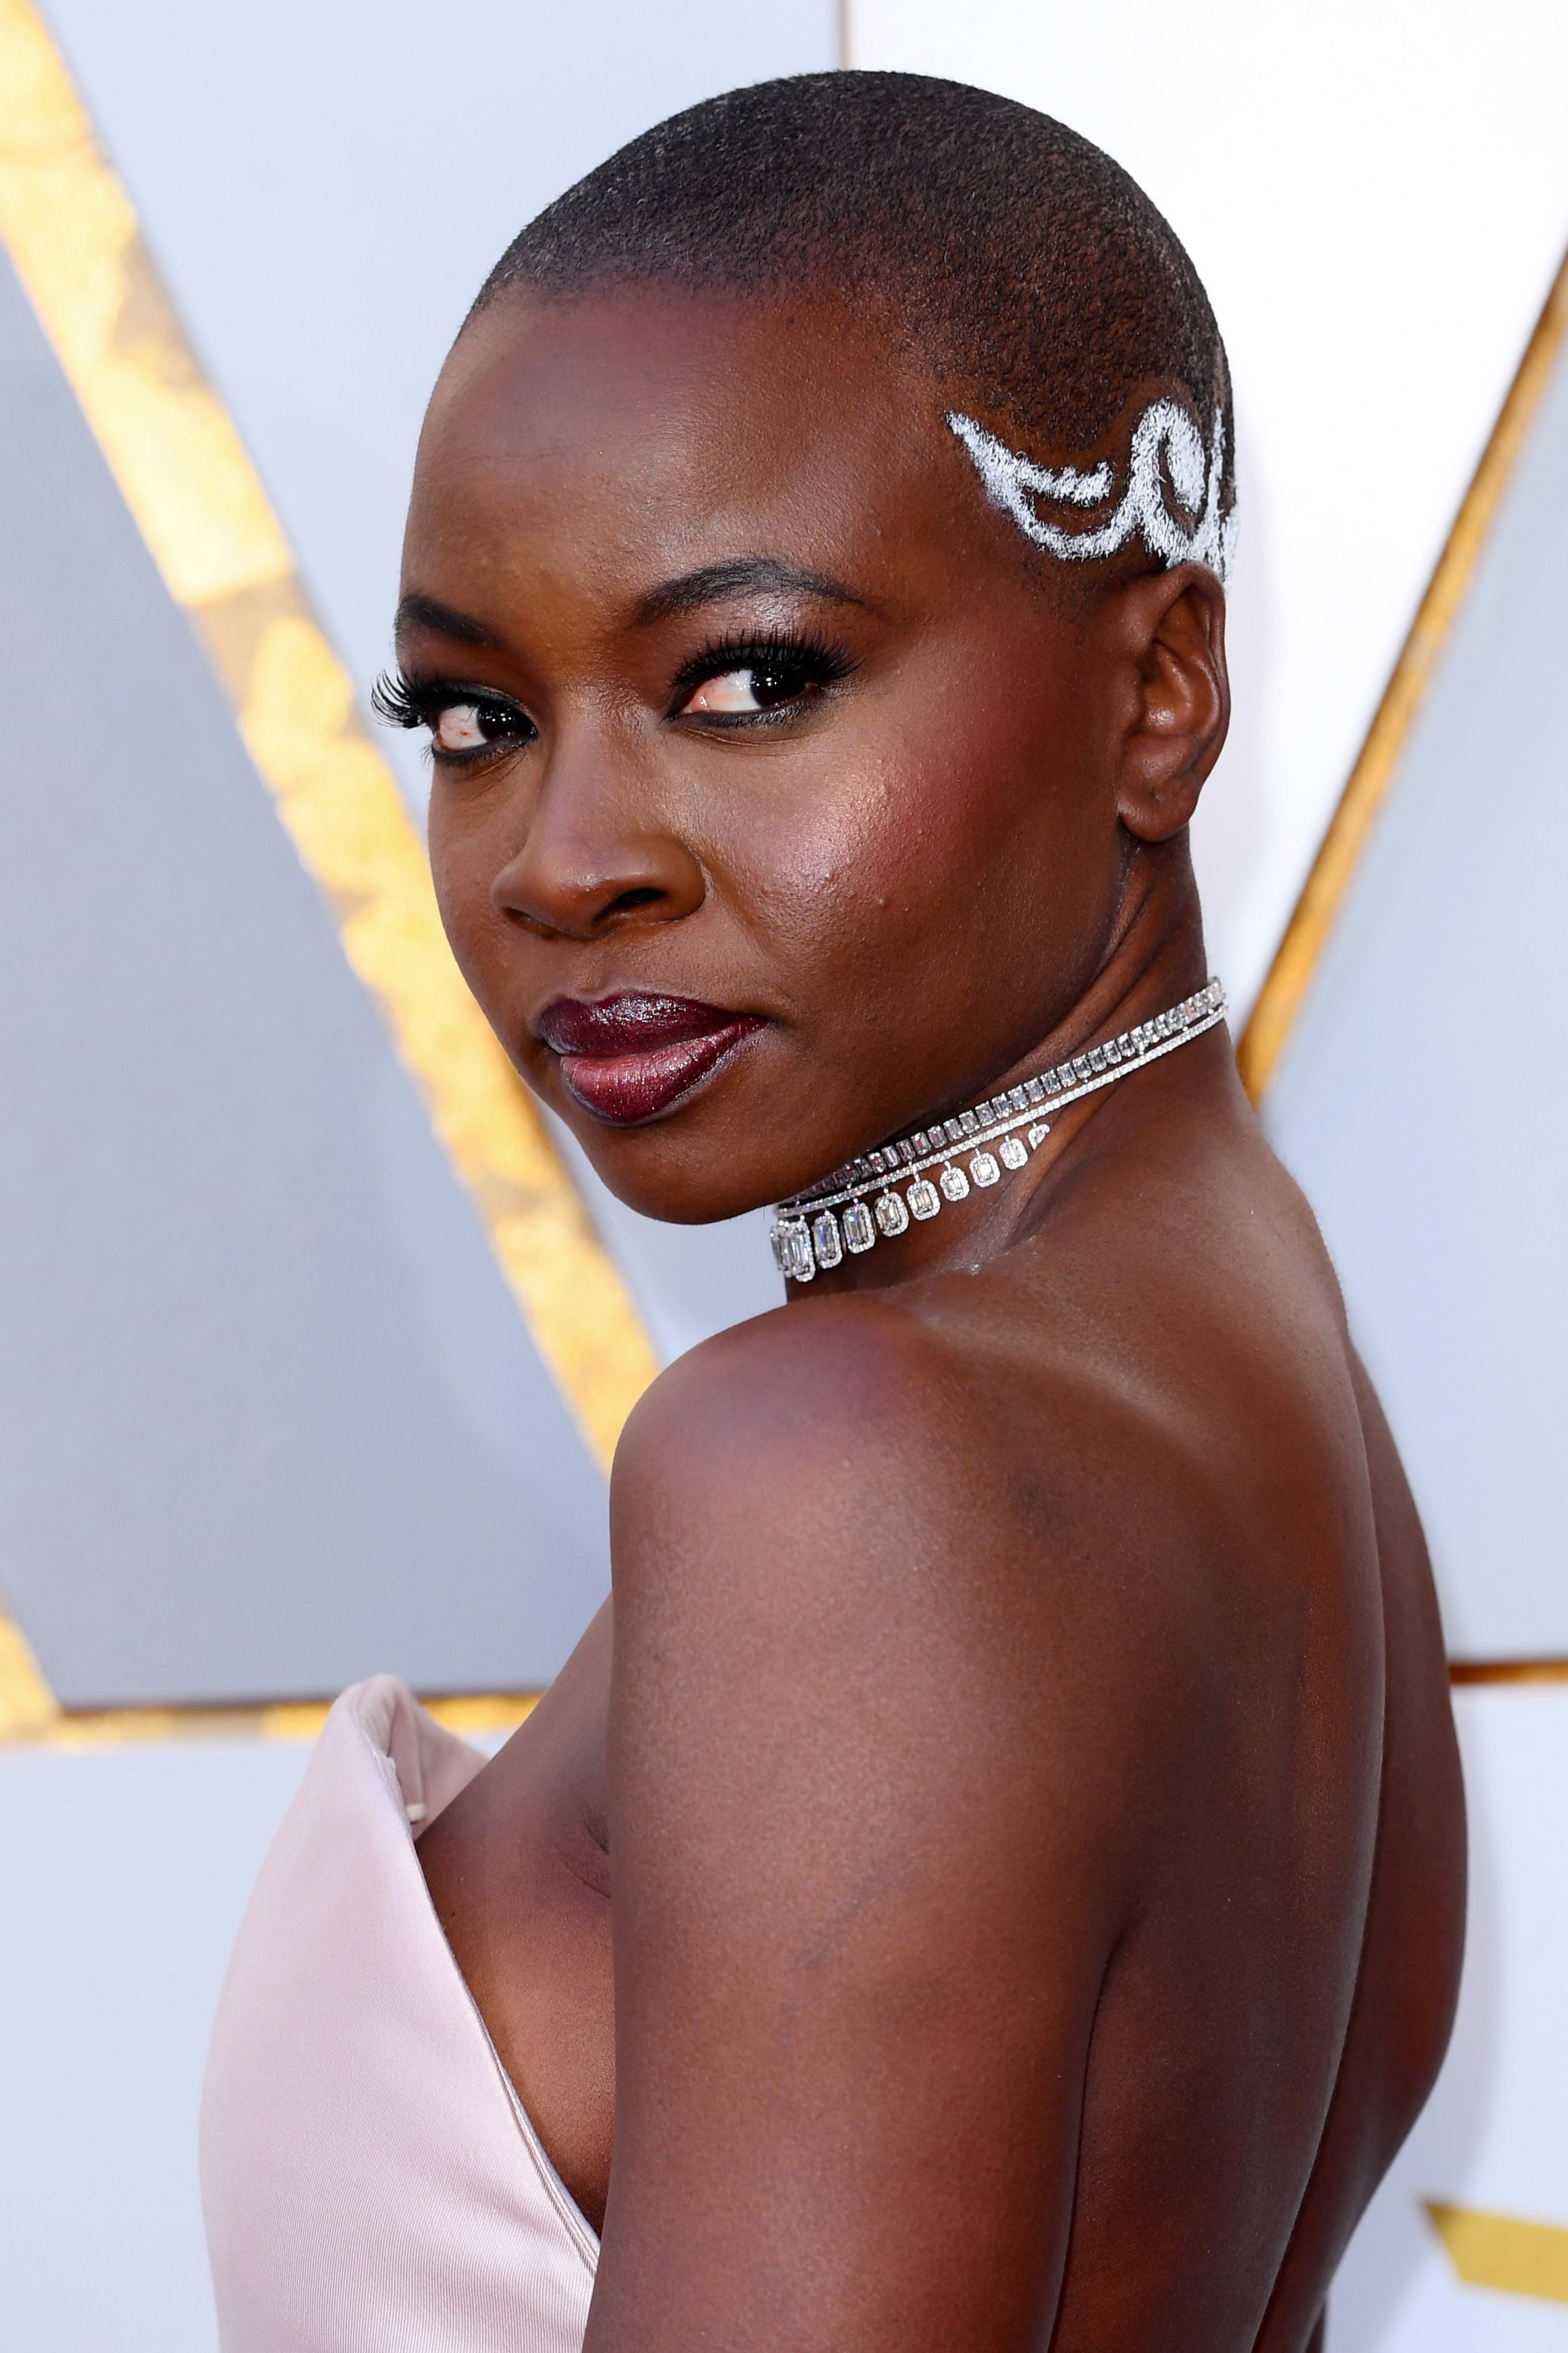 The Women Who Slayed The 2018 Academy Award's Red Carpet
